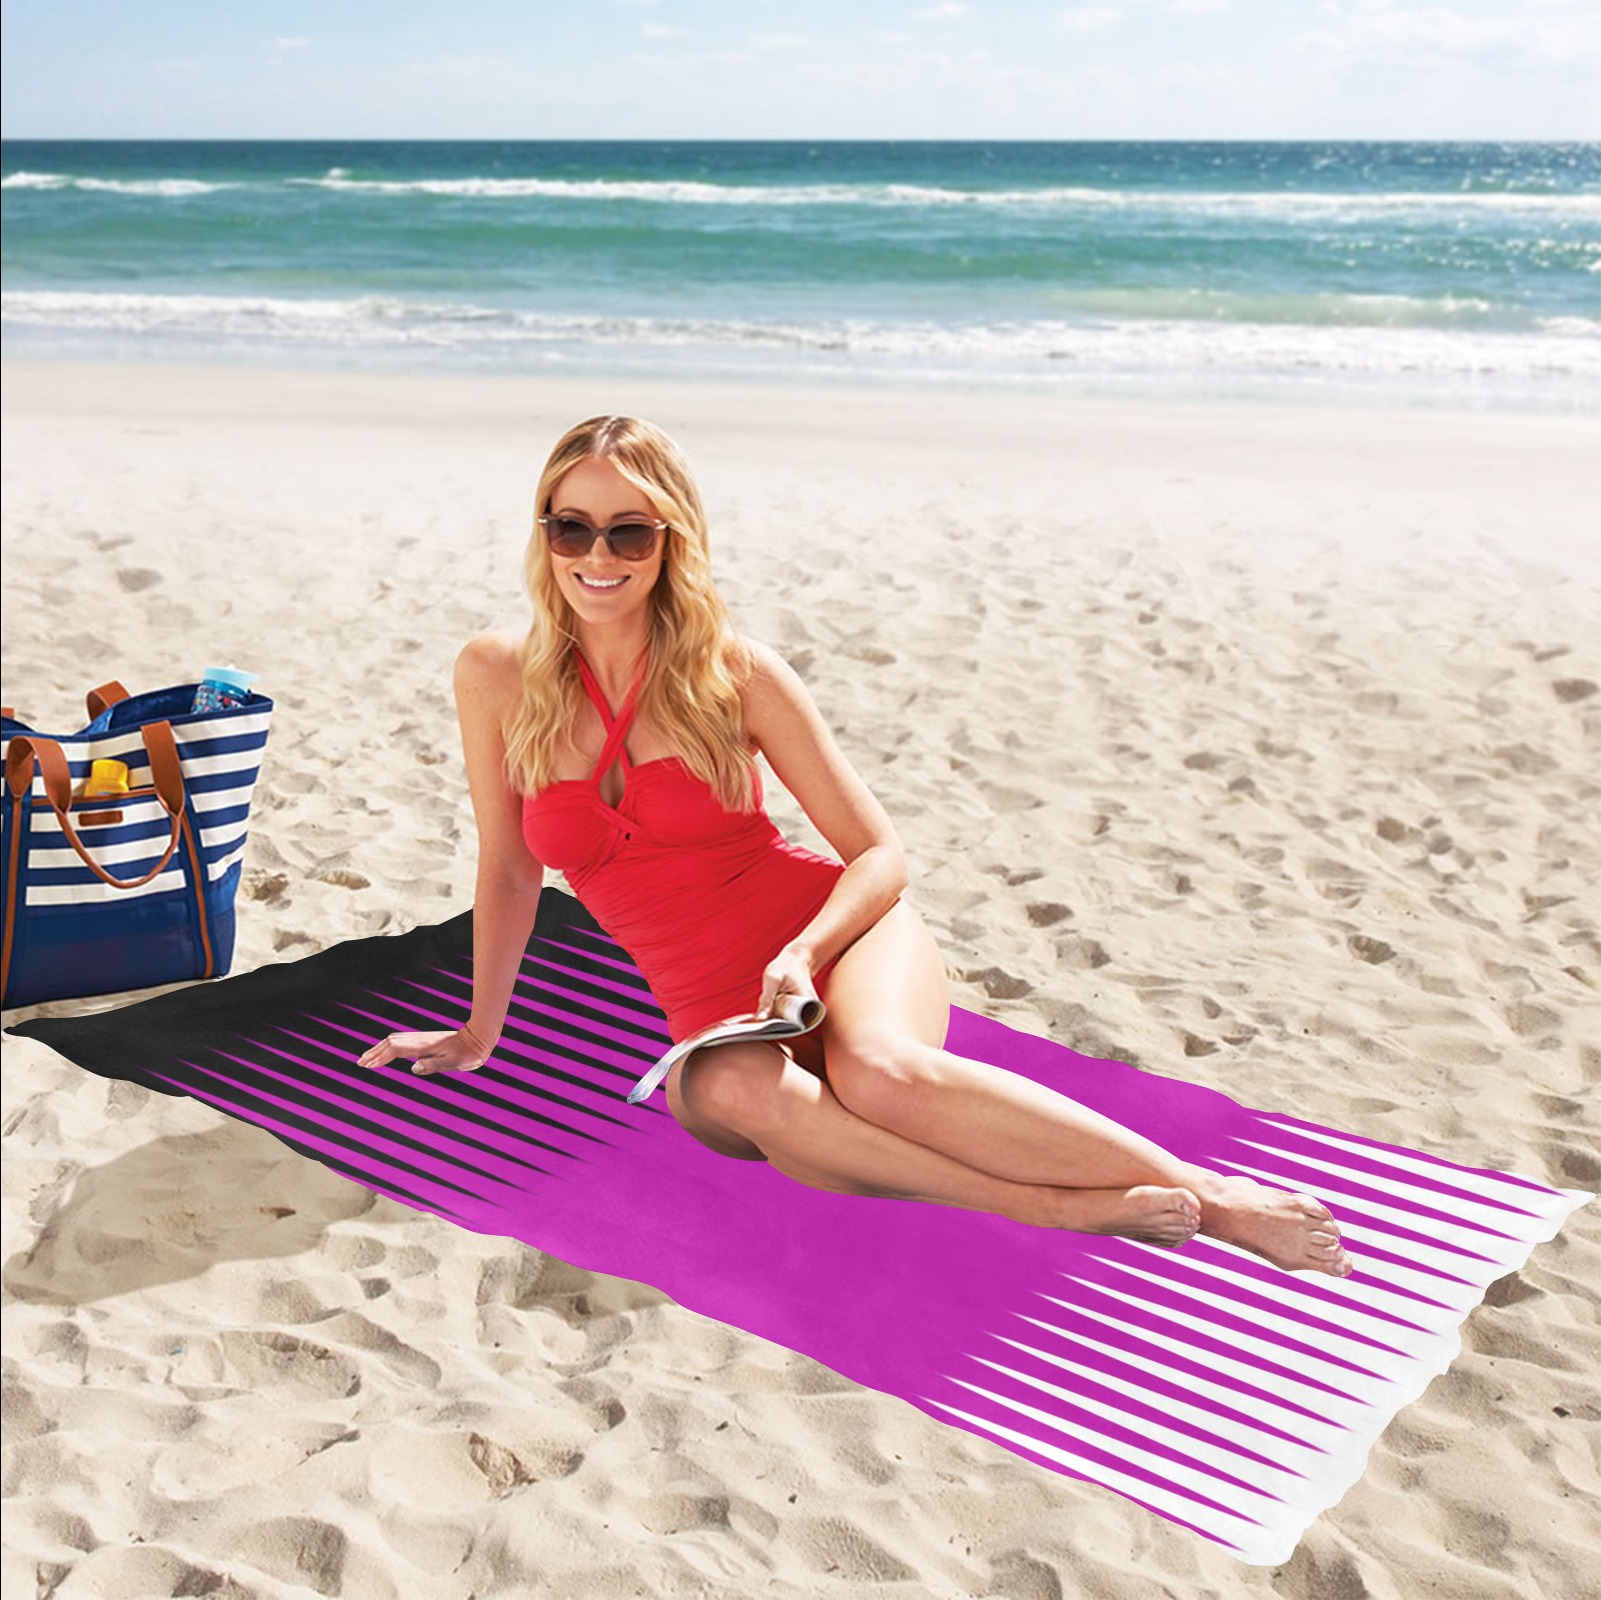 Wave Design Pink and Black Beach Towel 32"x 71"